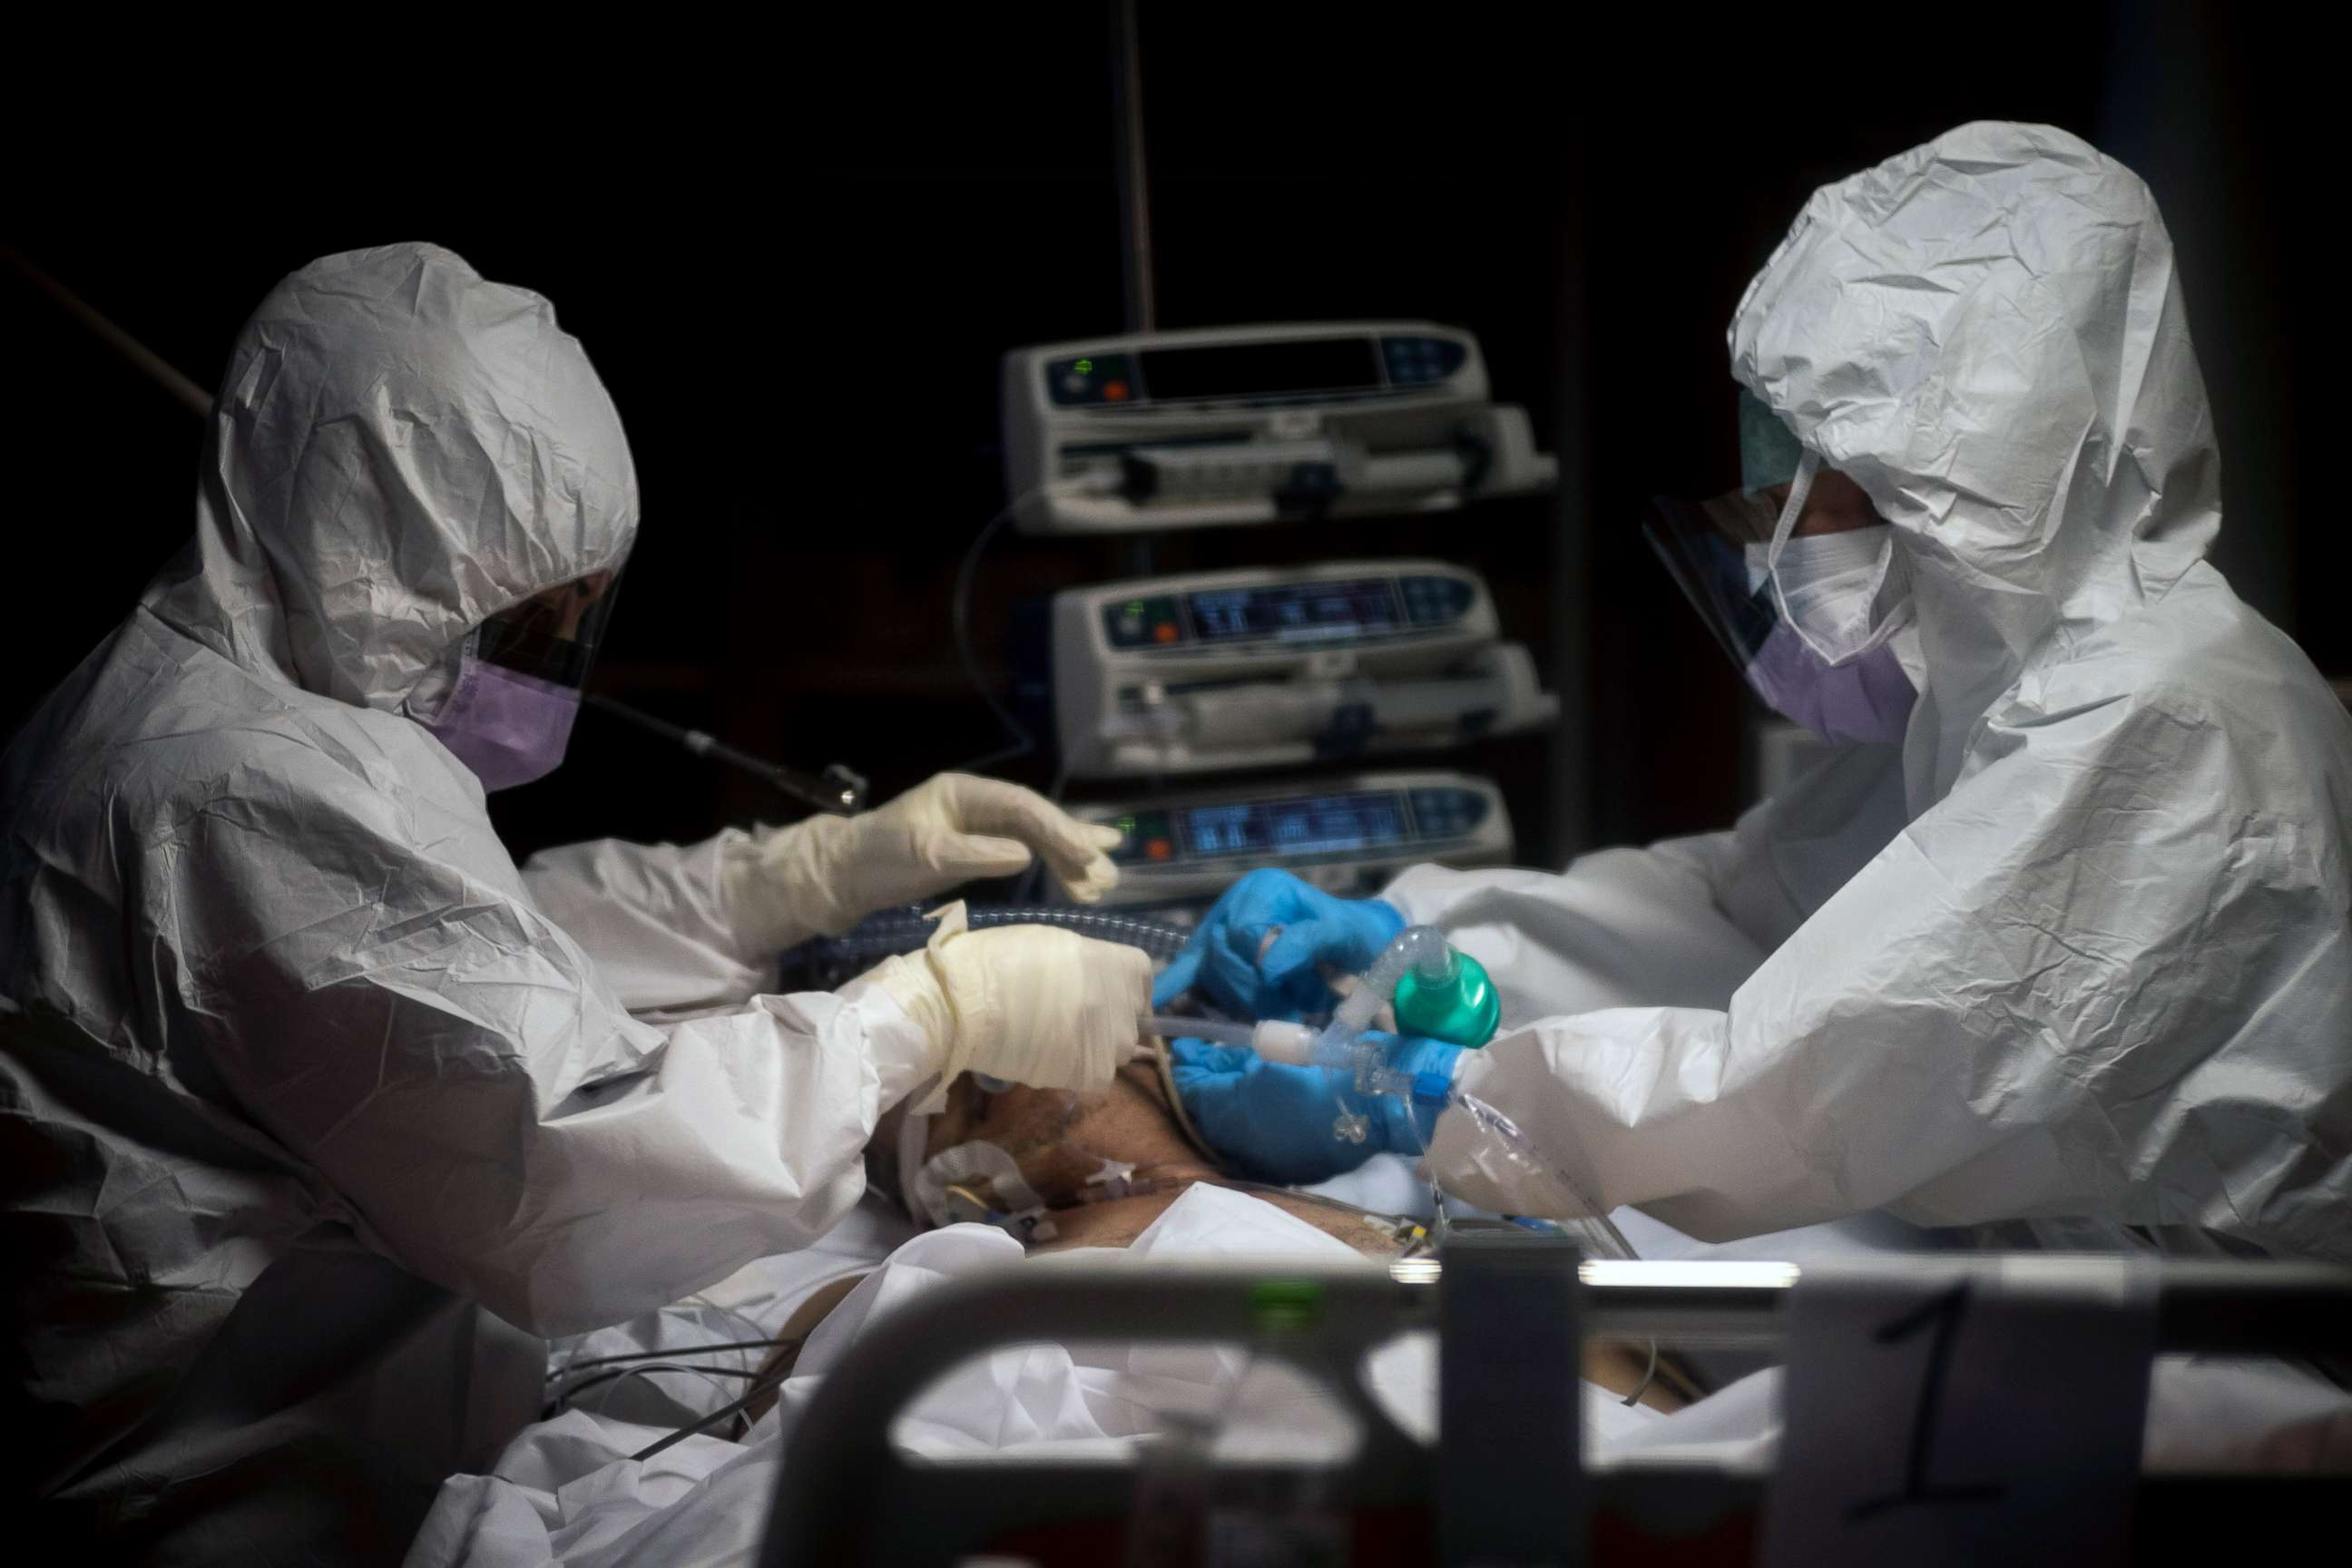 PHOTO: Doctors treat COVID-19 patients in an intensive care unit at the third Covid 3 Hospital (Istituto clinico CasalPalocco) during the Coronavirus emergency on March 26, 2020, in Rome.